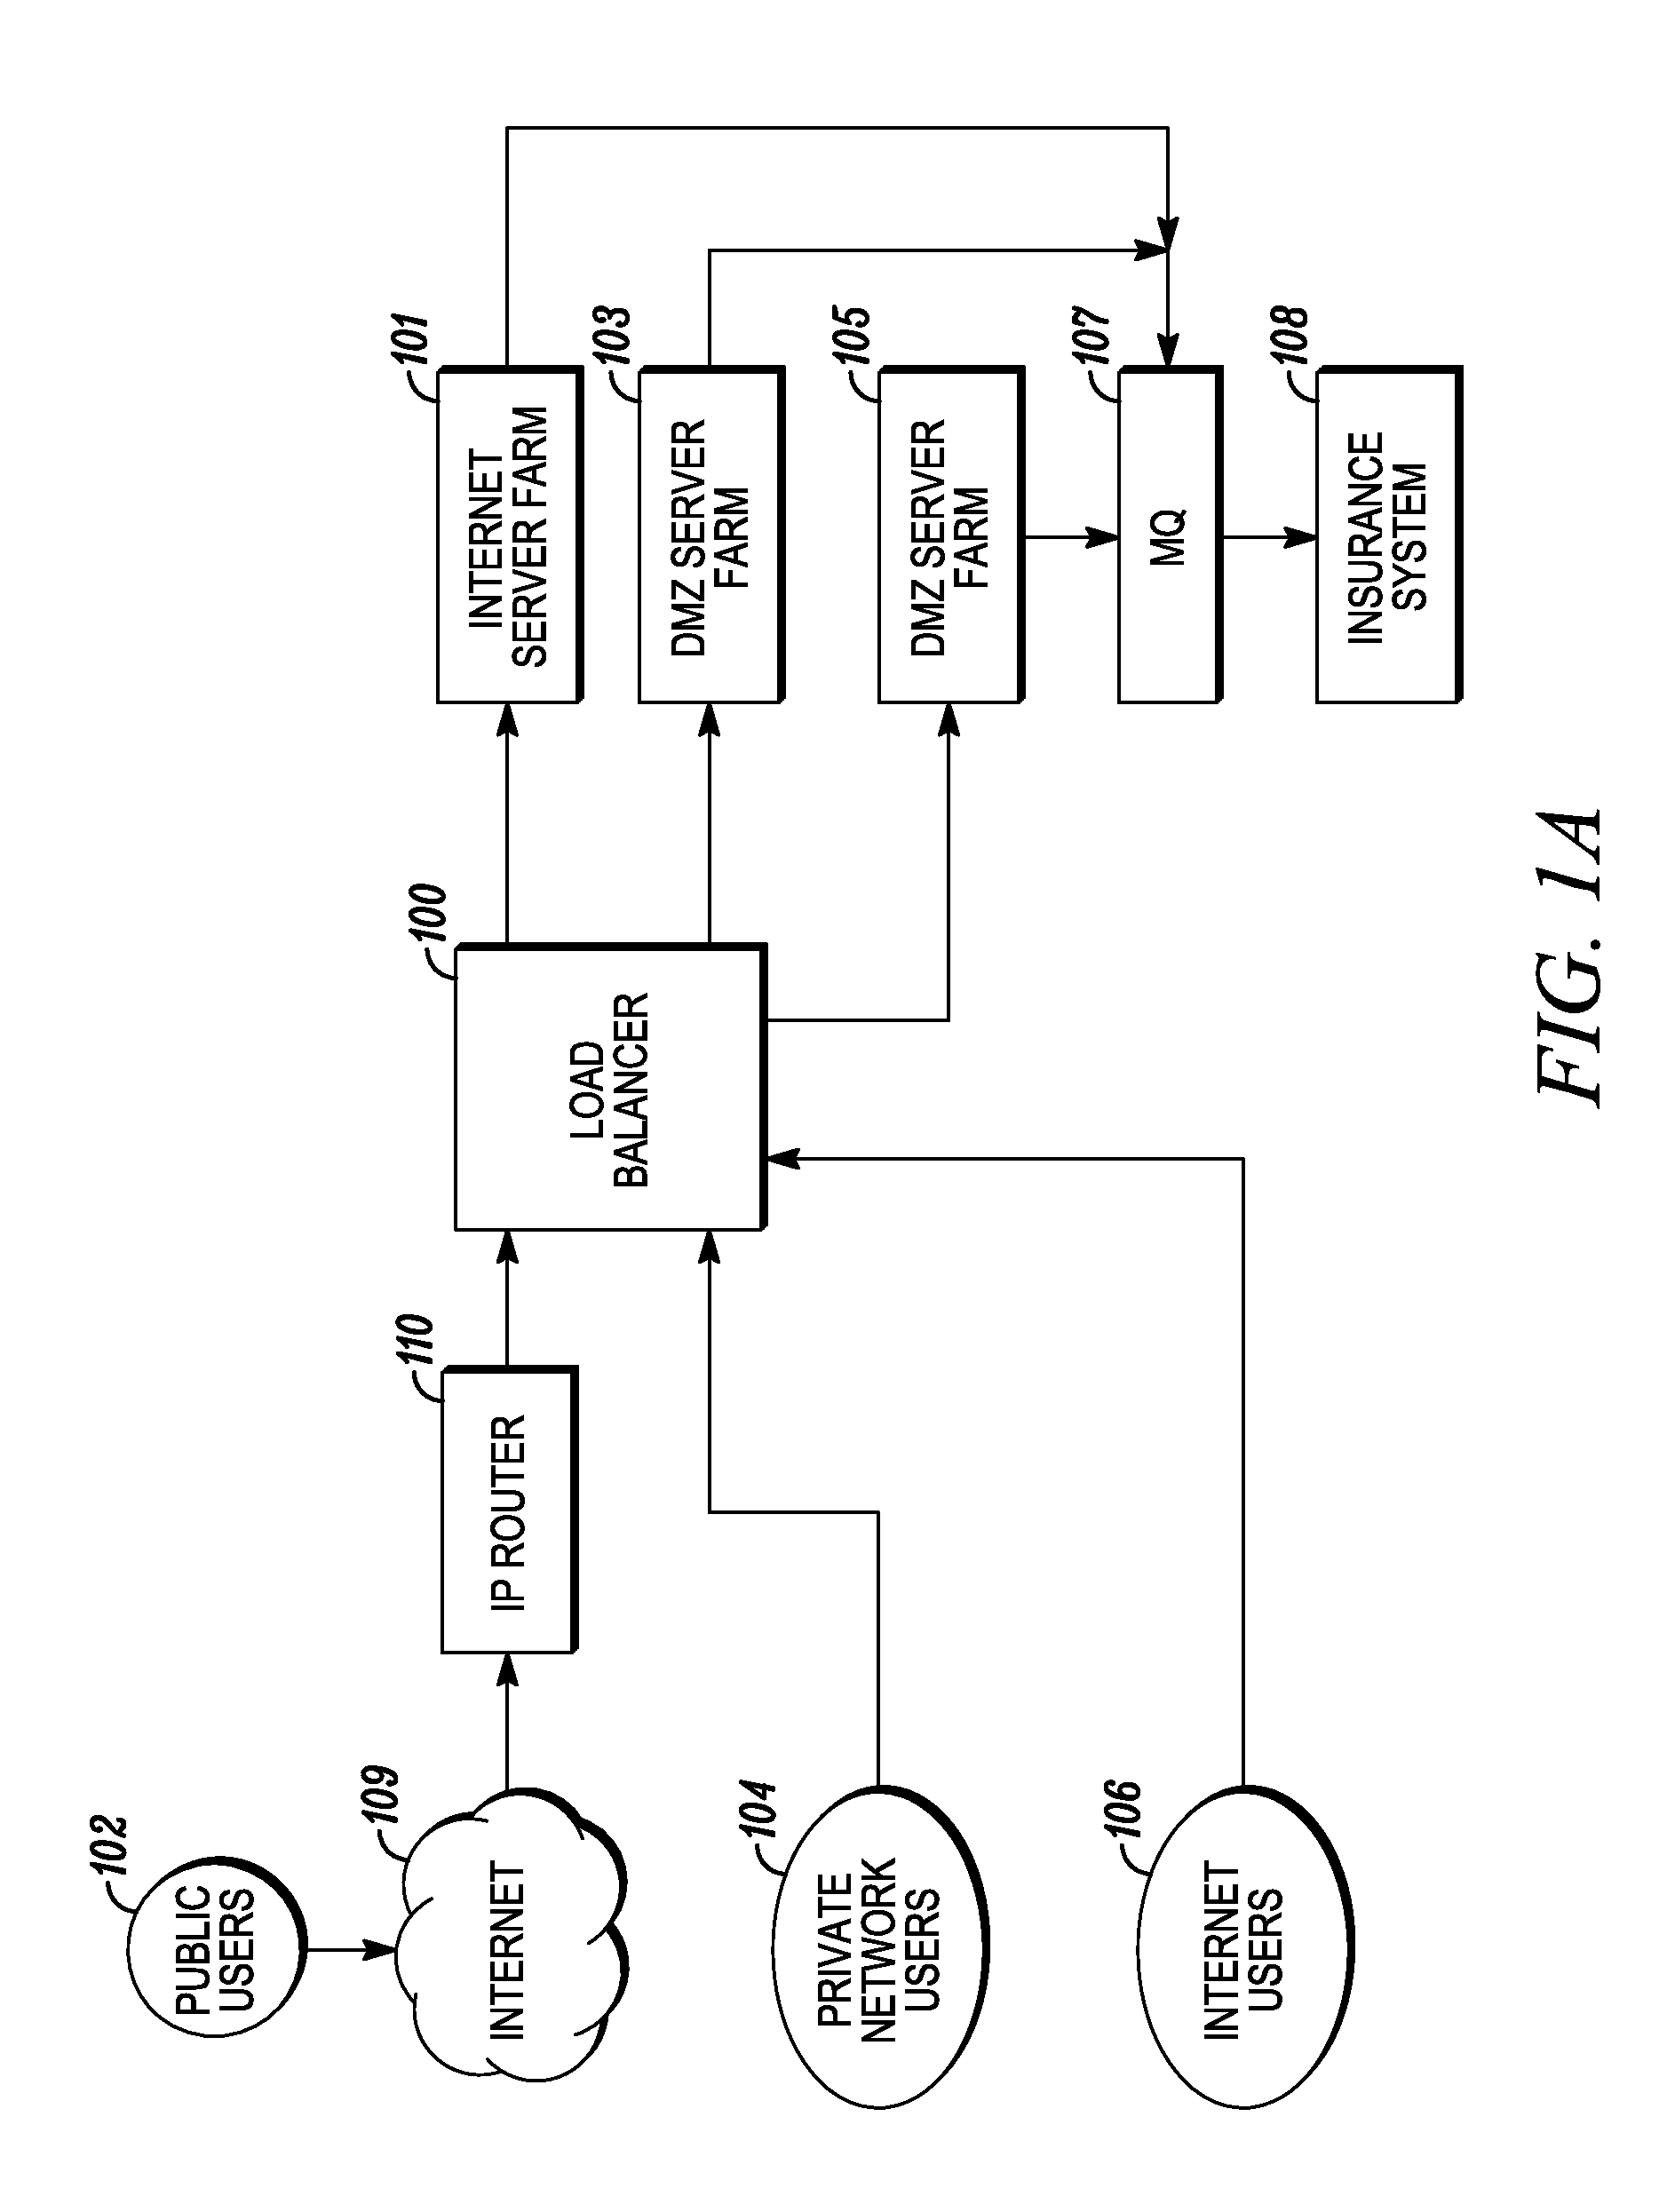 System and method for providing web-based user interface to legacy, personal-lines insurance applications